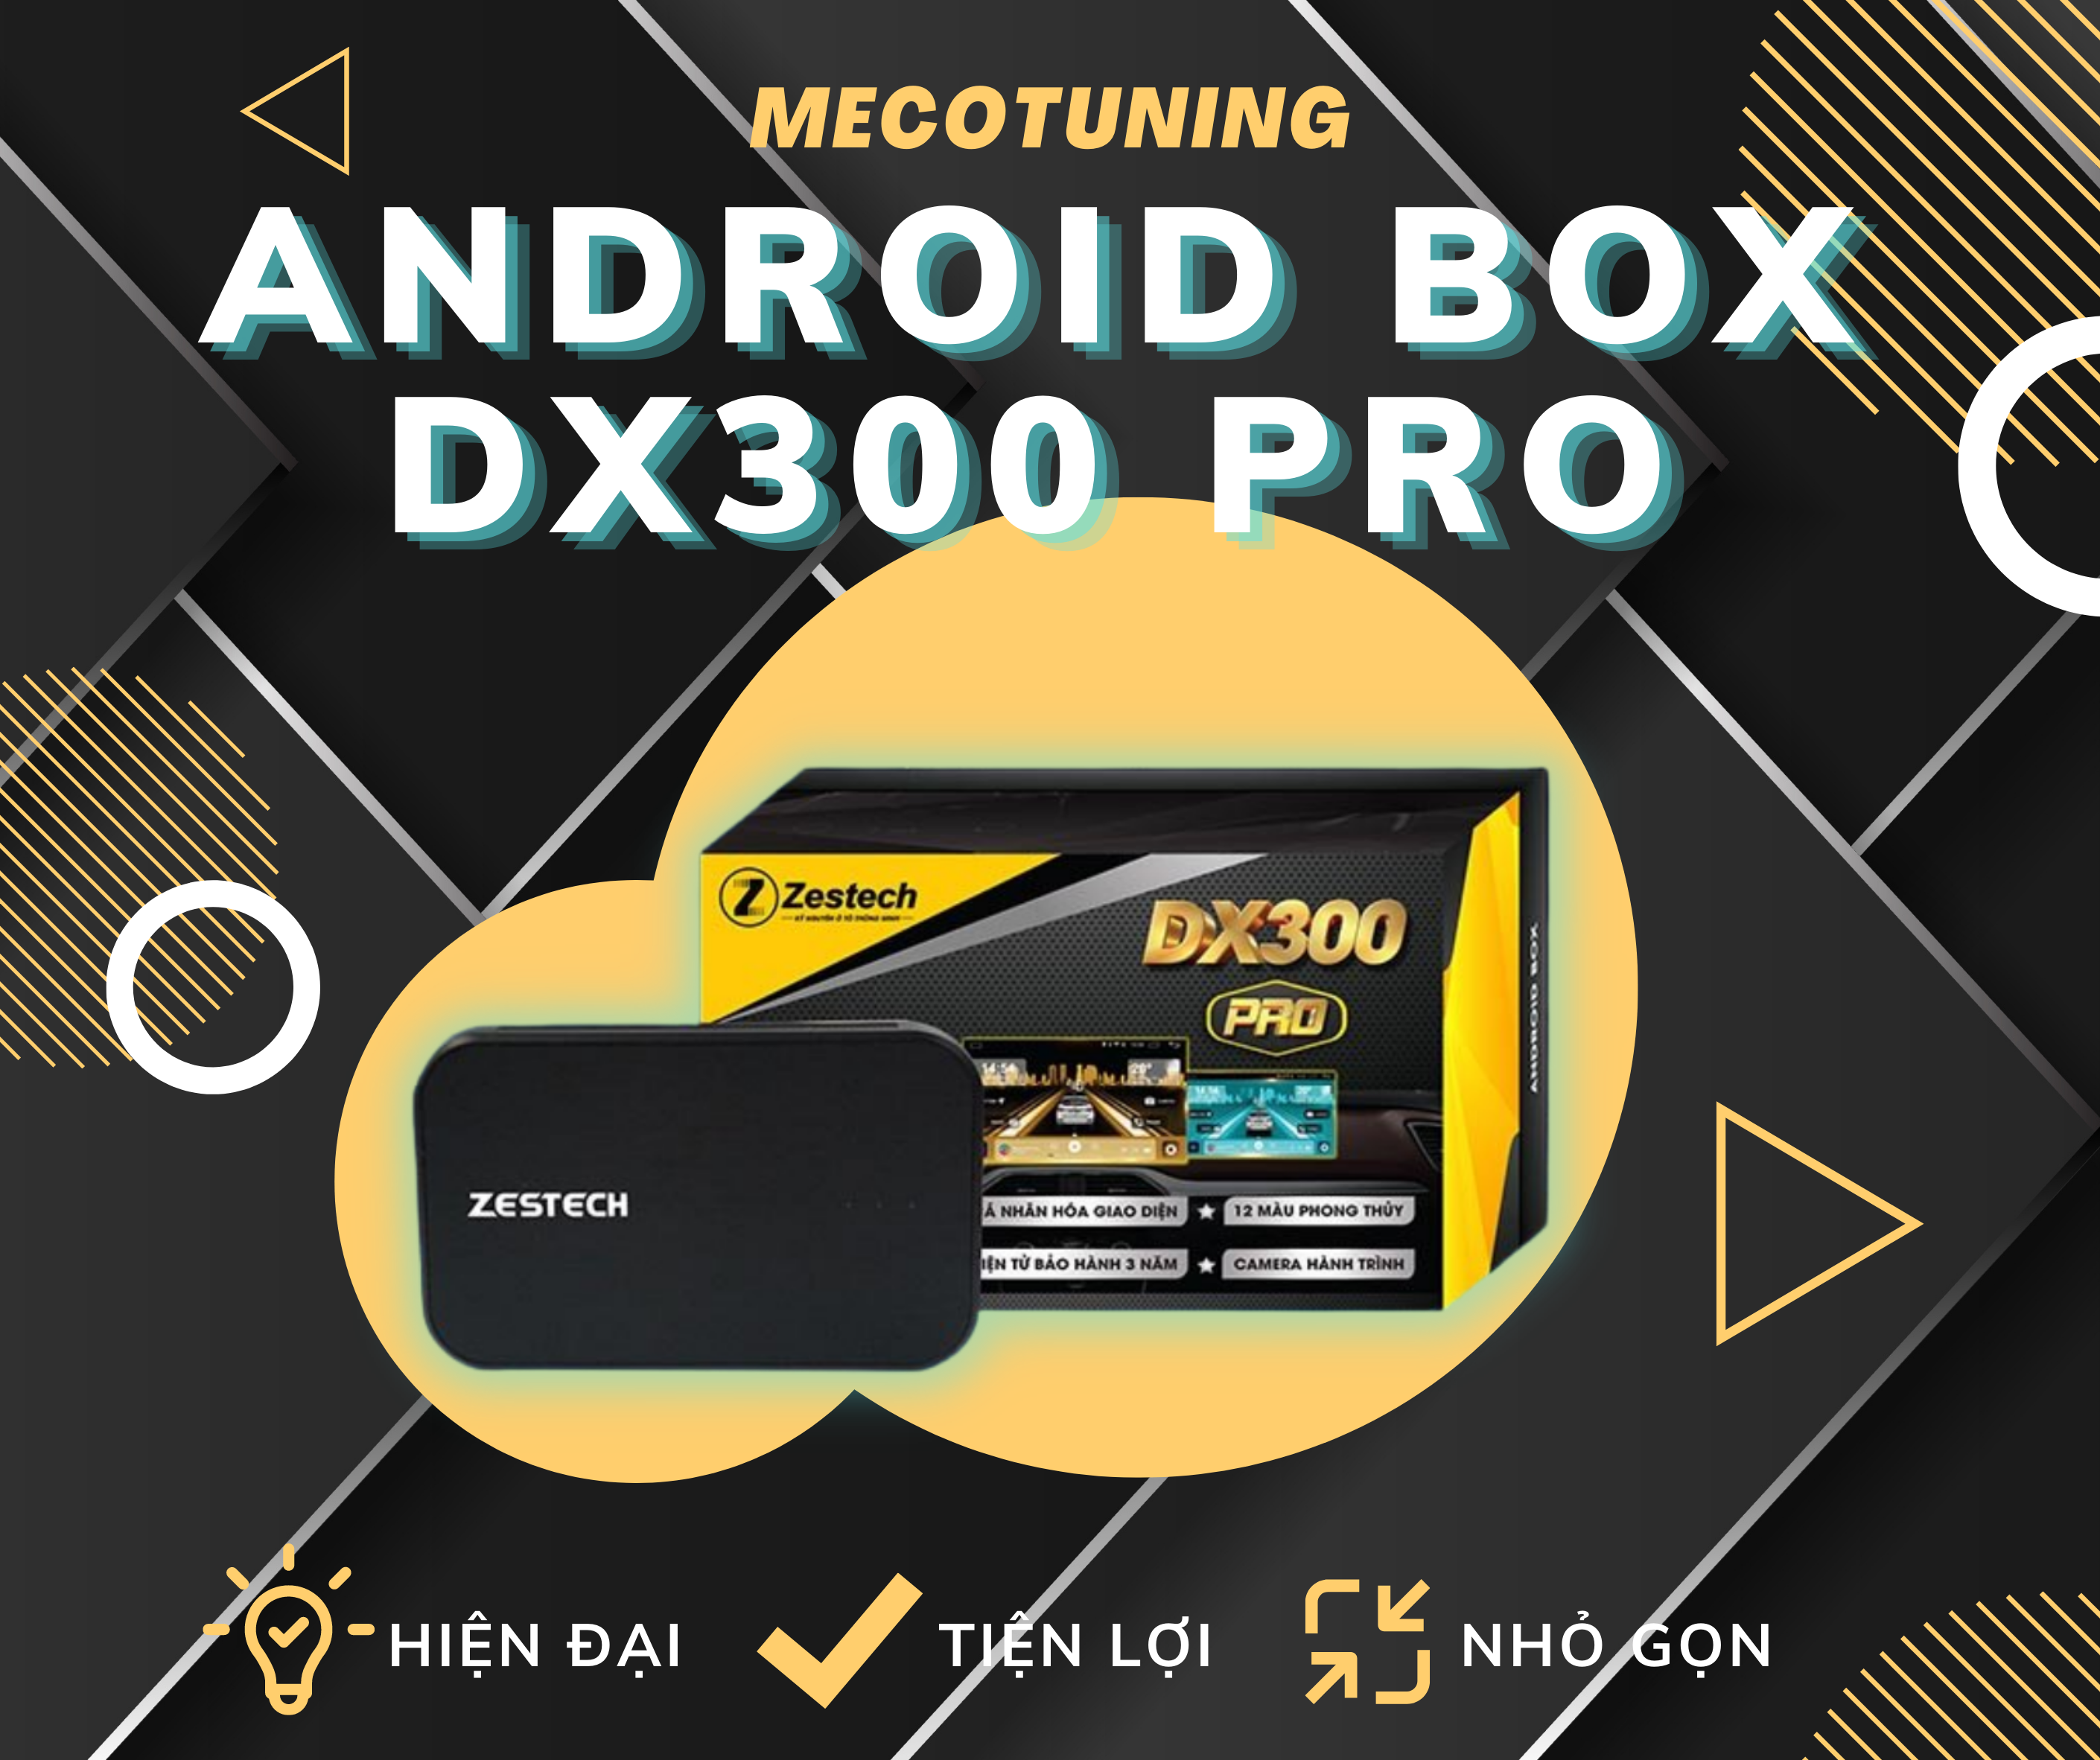 Android box dx300 pro